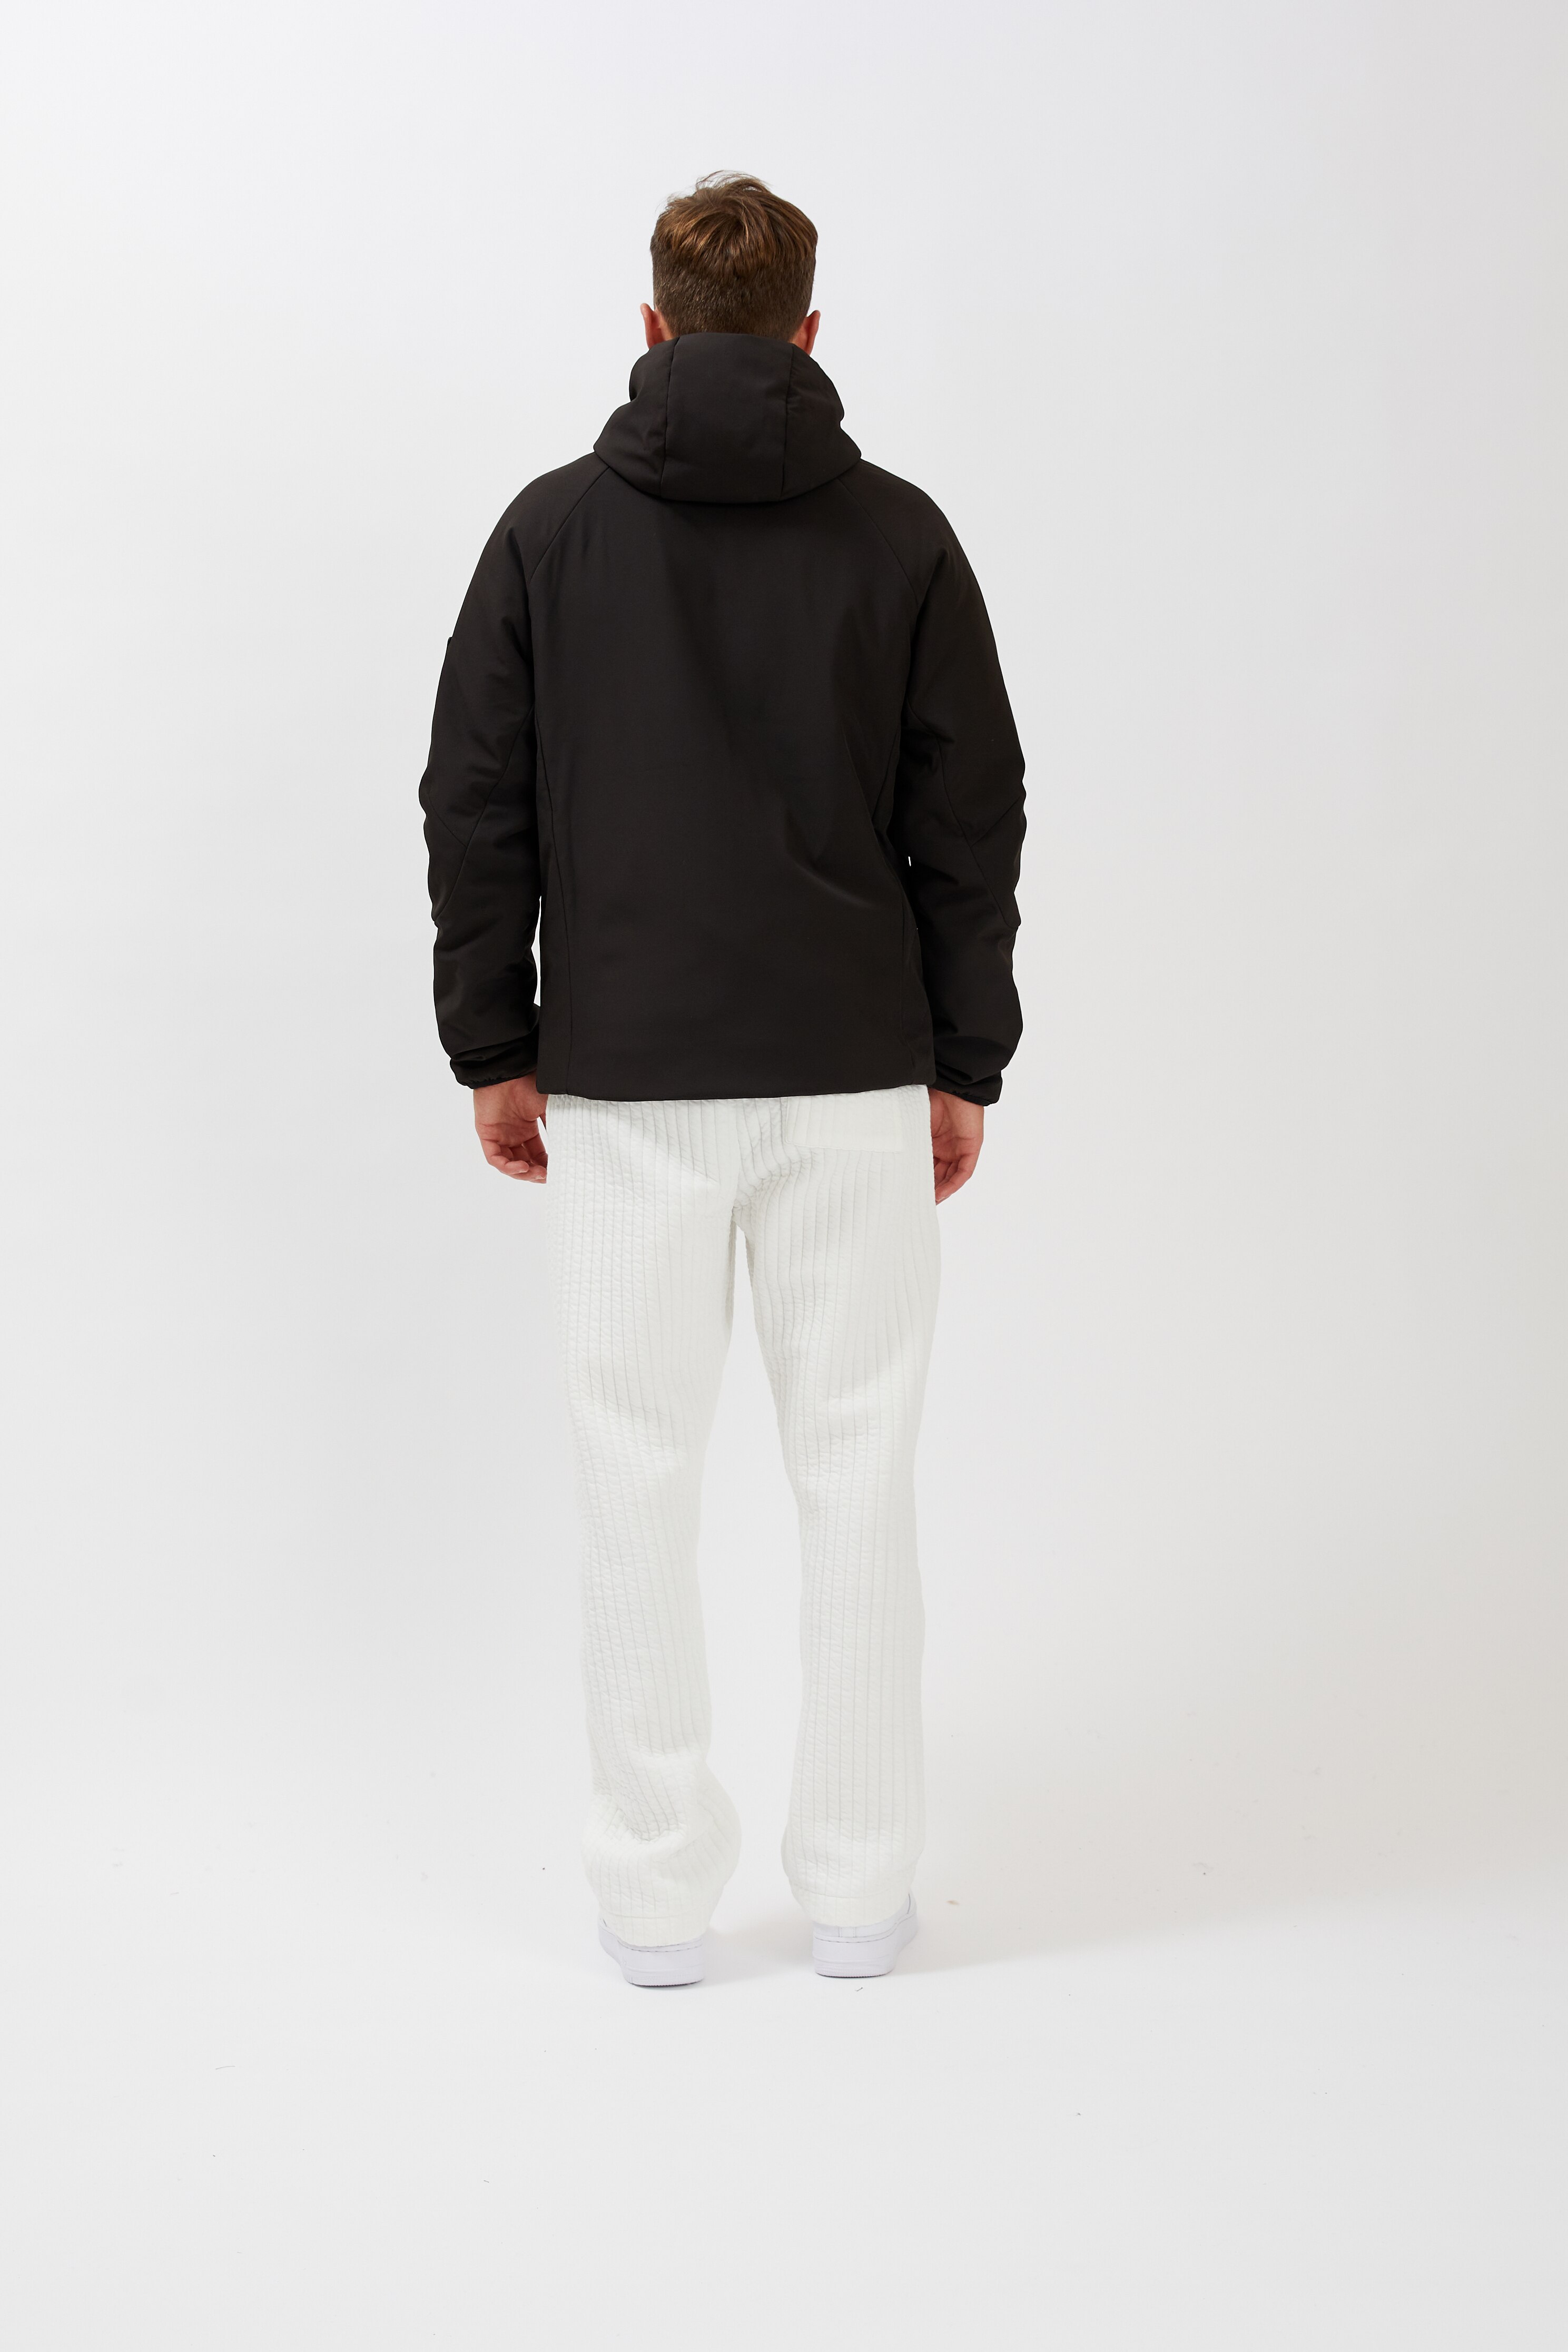 Point Zero Spring 24 Mens Hooded Ultralight Midweight Jacket